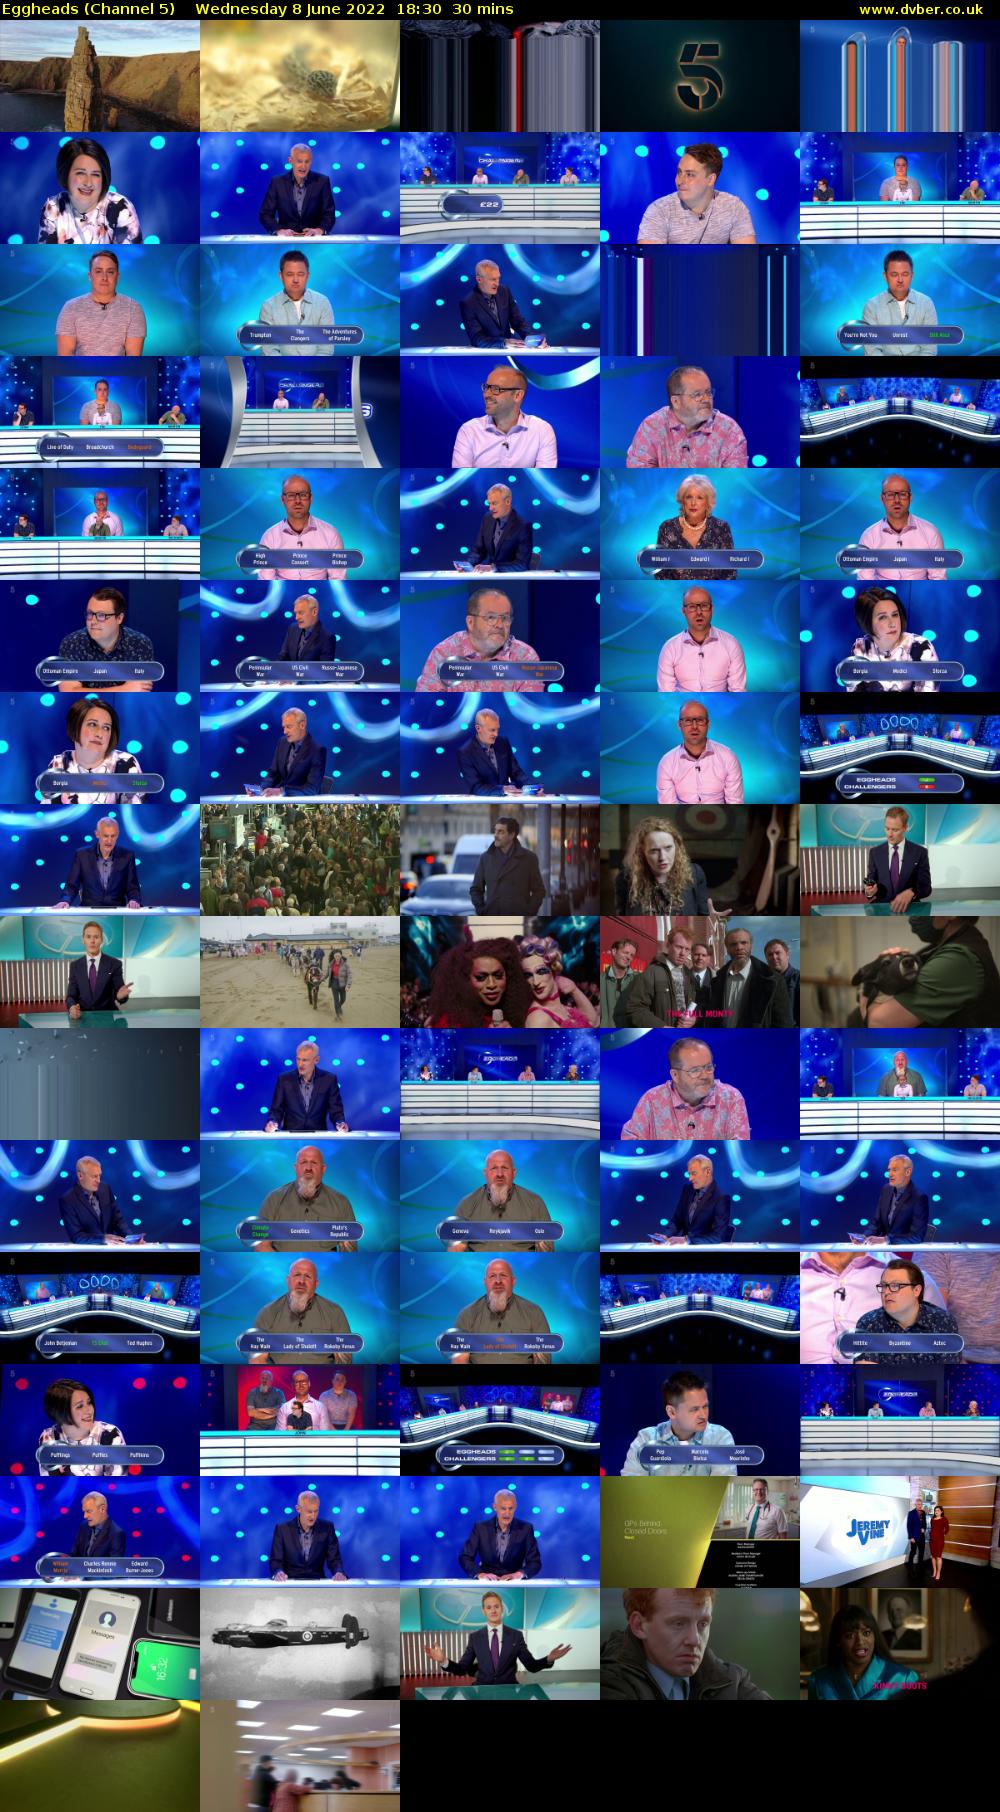 Eggheads (Channel 5) Wednesday 8 June 2022 18:30 - 19:00